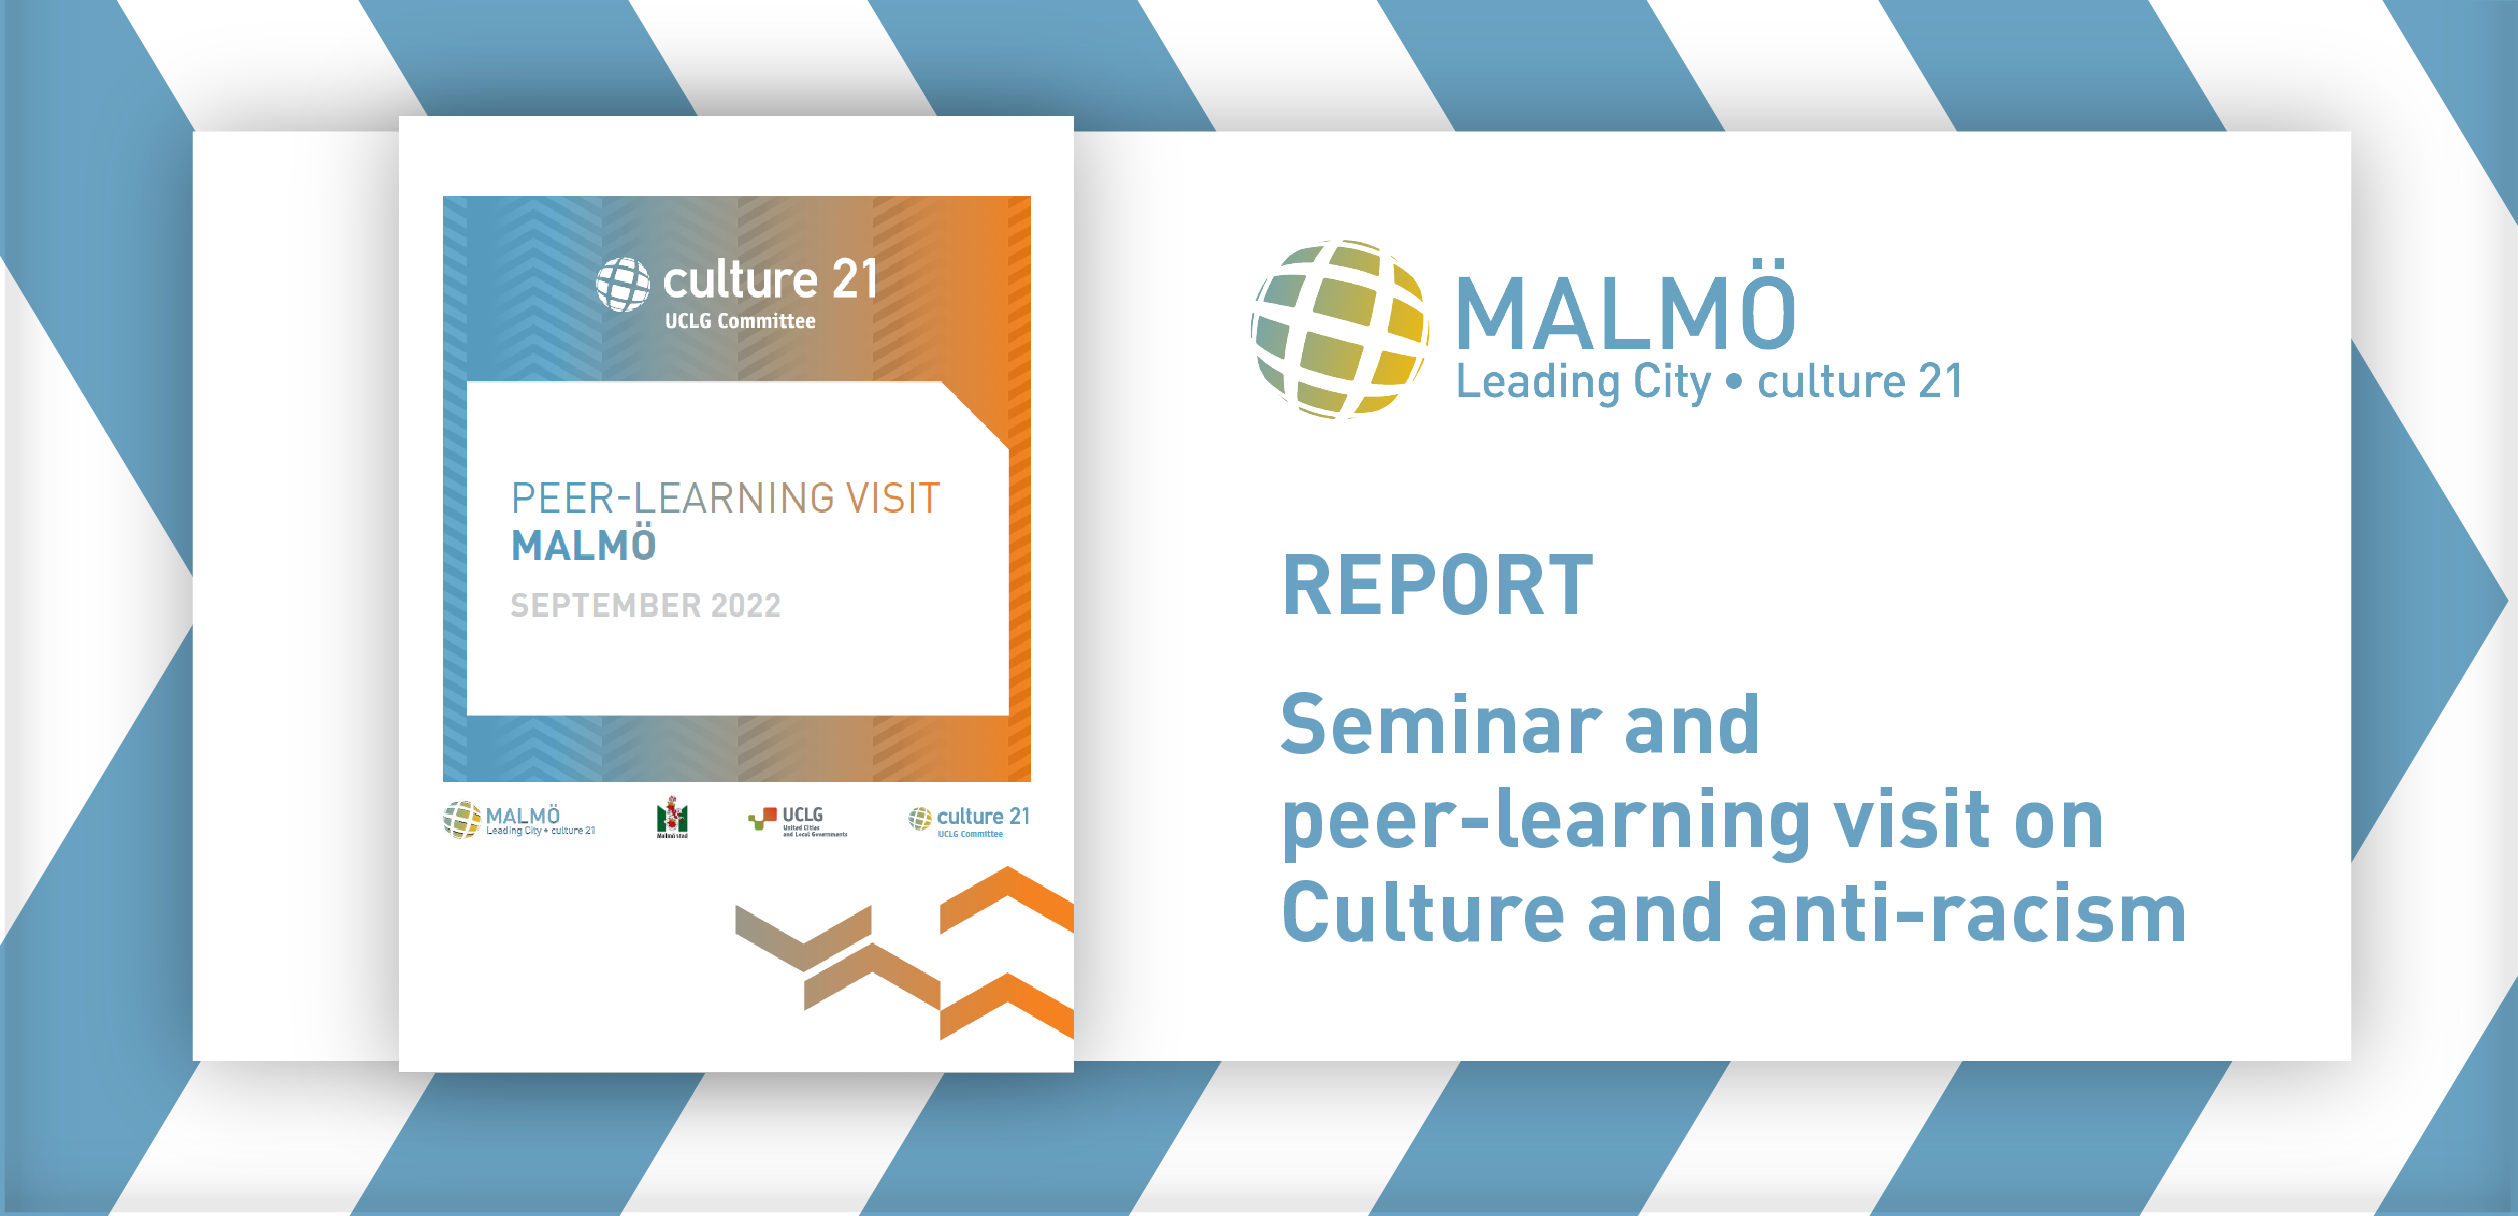 2nd Uclg Culture Summit